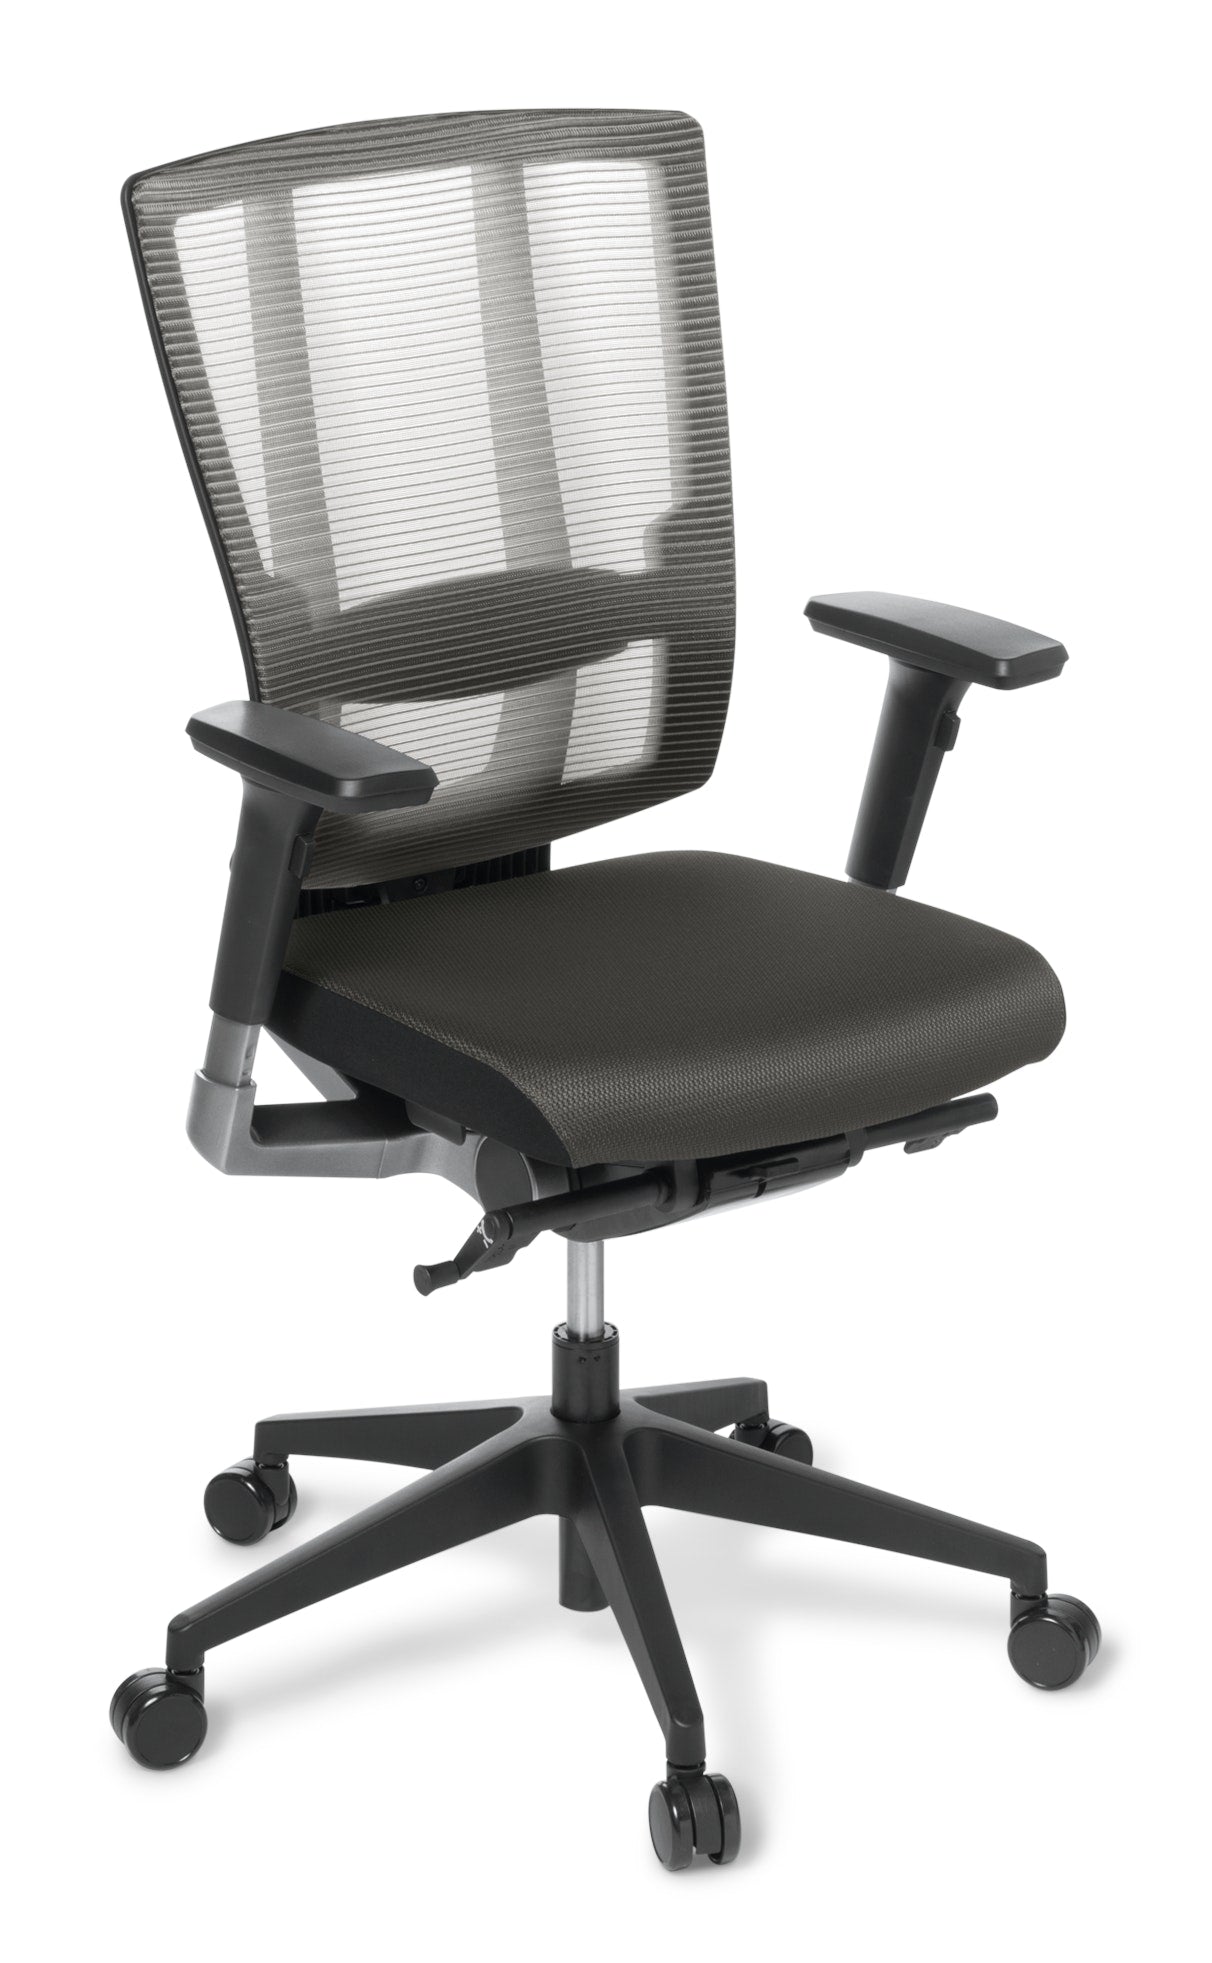 Cloud Ergo mesh back chair with arms